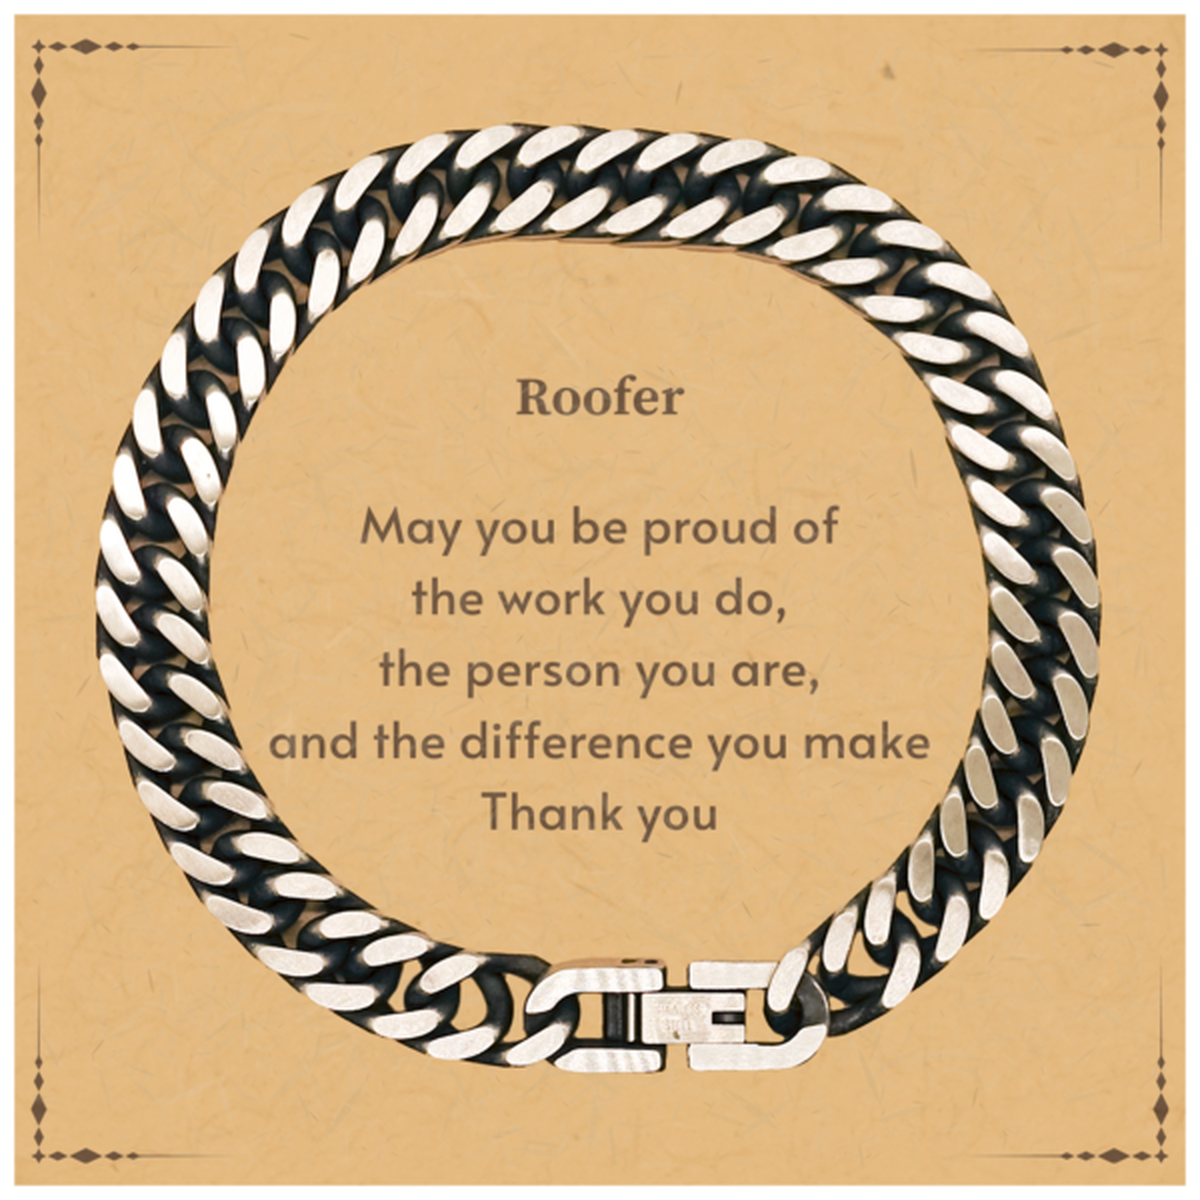 Heartwarming Cuban Link Chain Bracelet Retirement Coworkers Gifts for Roofer, Roofer May You be proud of the work you do, the person you are Gifts for Boss Men Women Friends